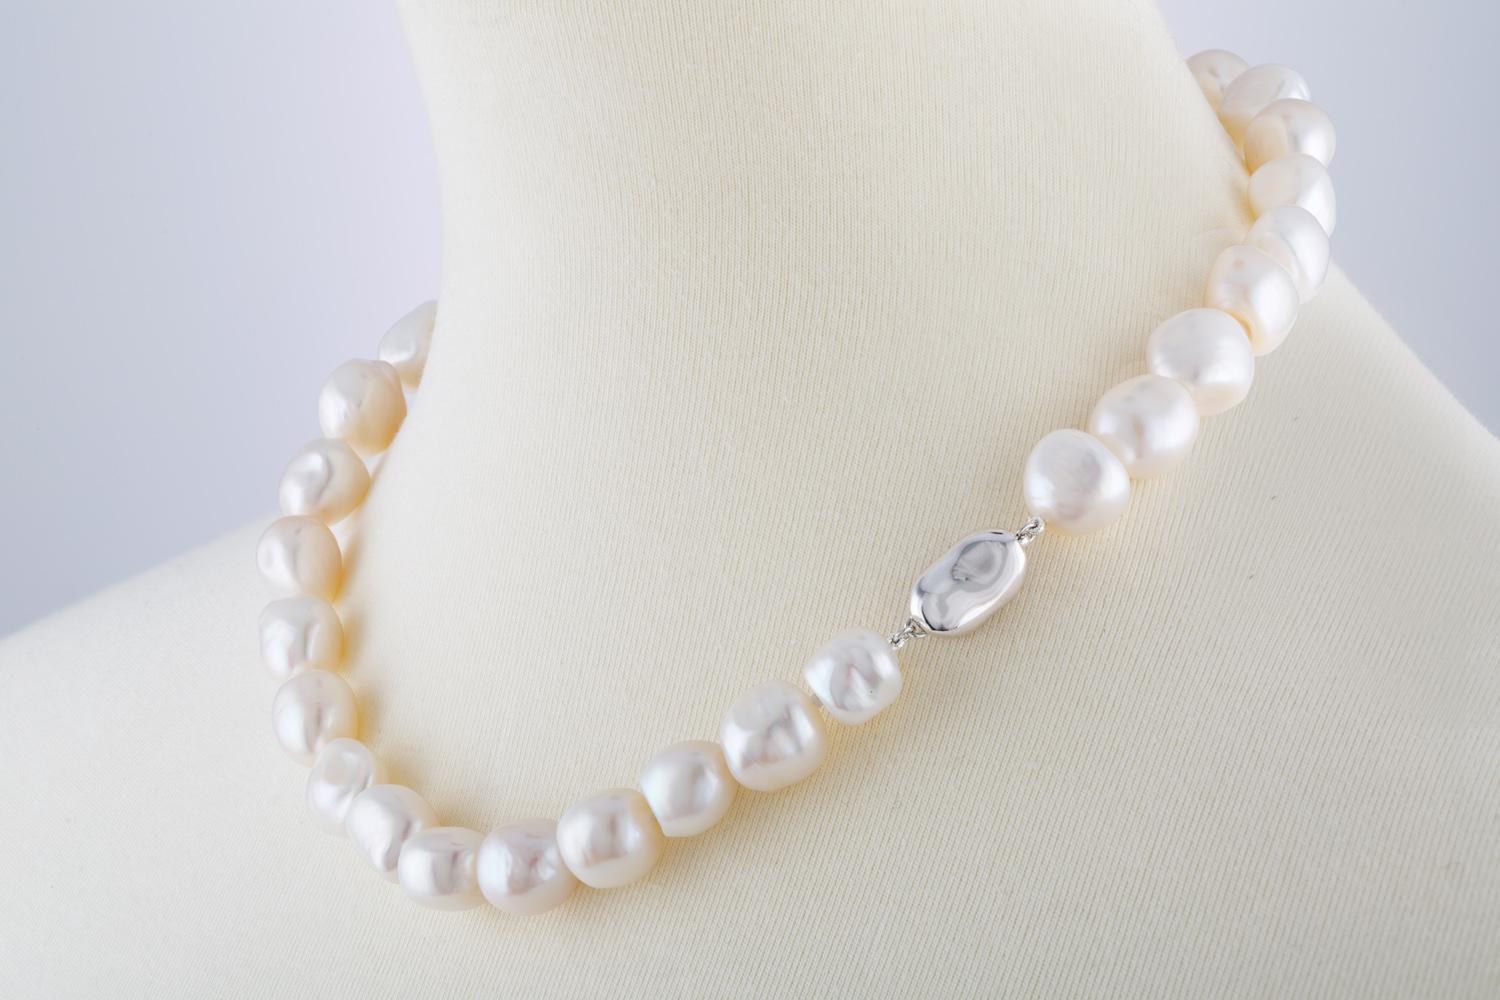 This necklace features Chinese Freshwater white baroque pearls measuring 12-13mm.
These organic shaped lustrous pearls are strung knotted with a silver clasp.
Great for everyday casual elegance or dressing up.
The silver clasp is easy to use and